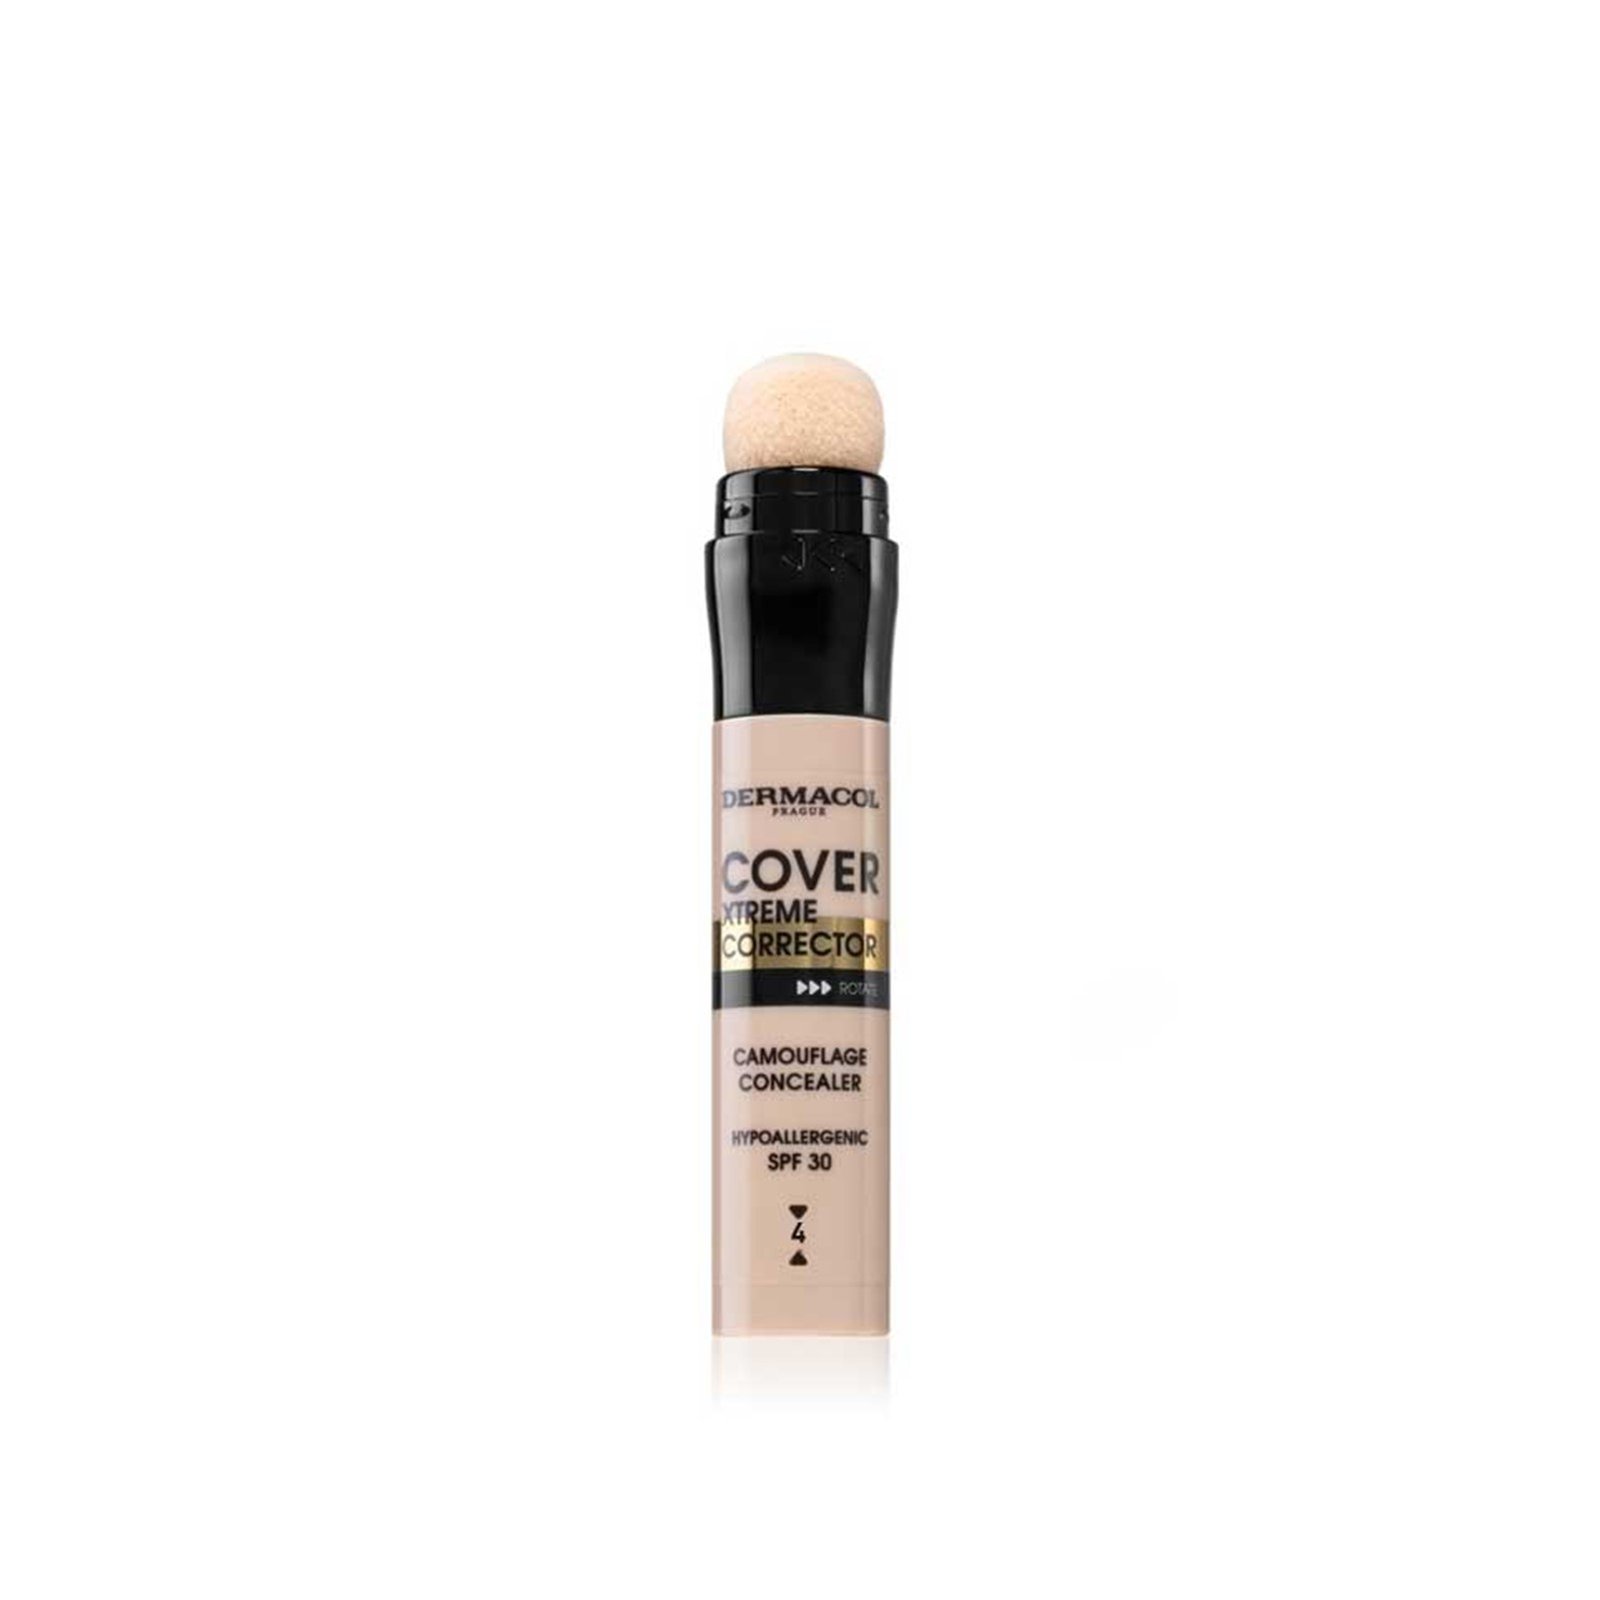 Dermacol Cover Xtreme Corrector 4 SPF30 8g